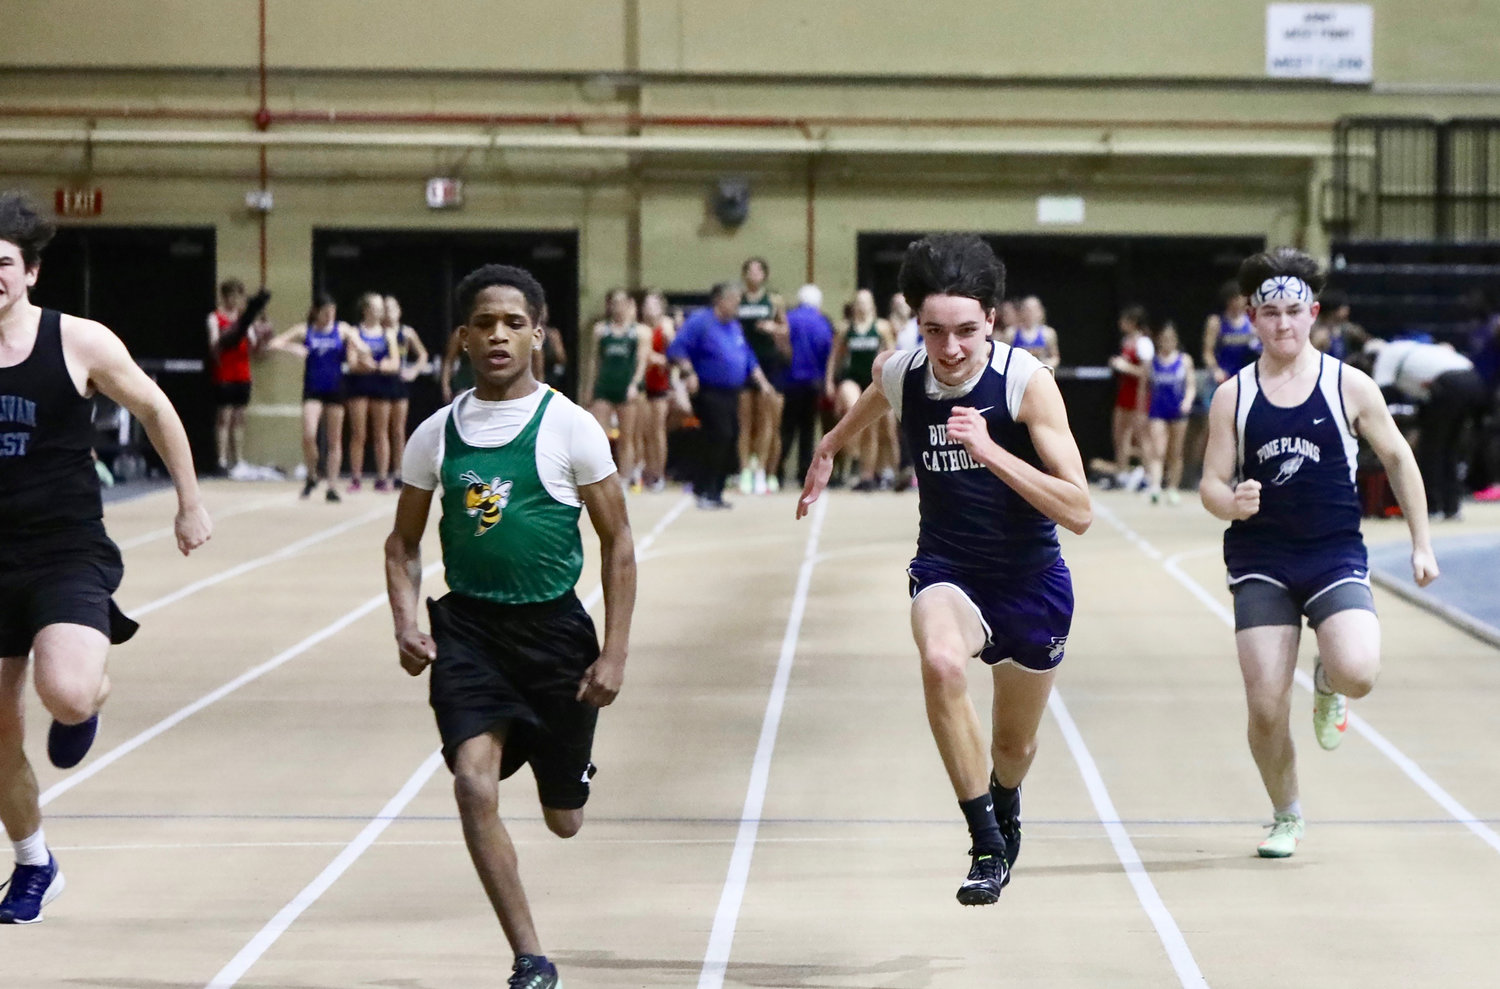 Eldred’s John Morabito wins his preliminary heat in the 55. He finished second in the Division VI finals.